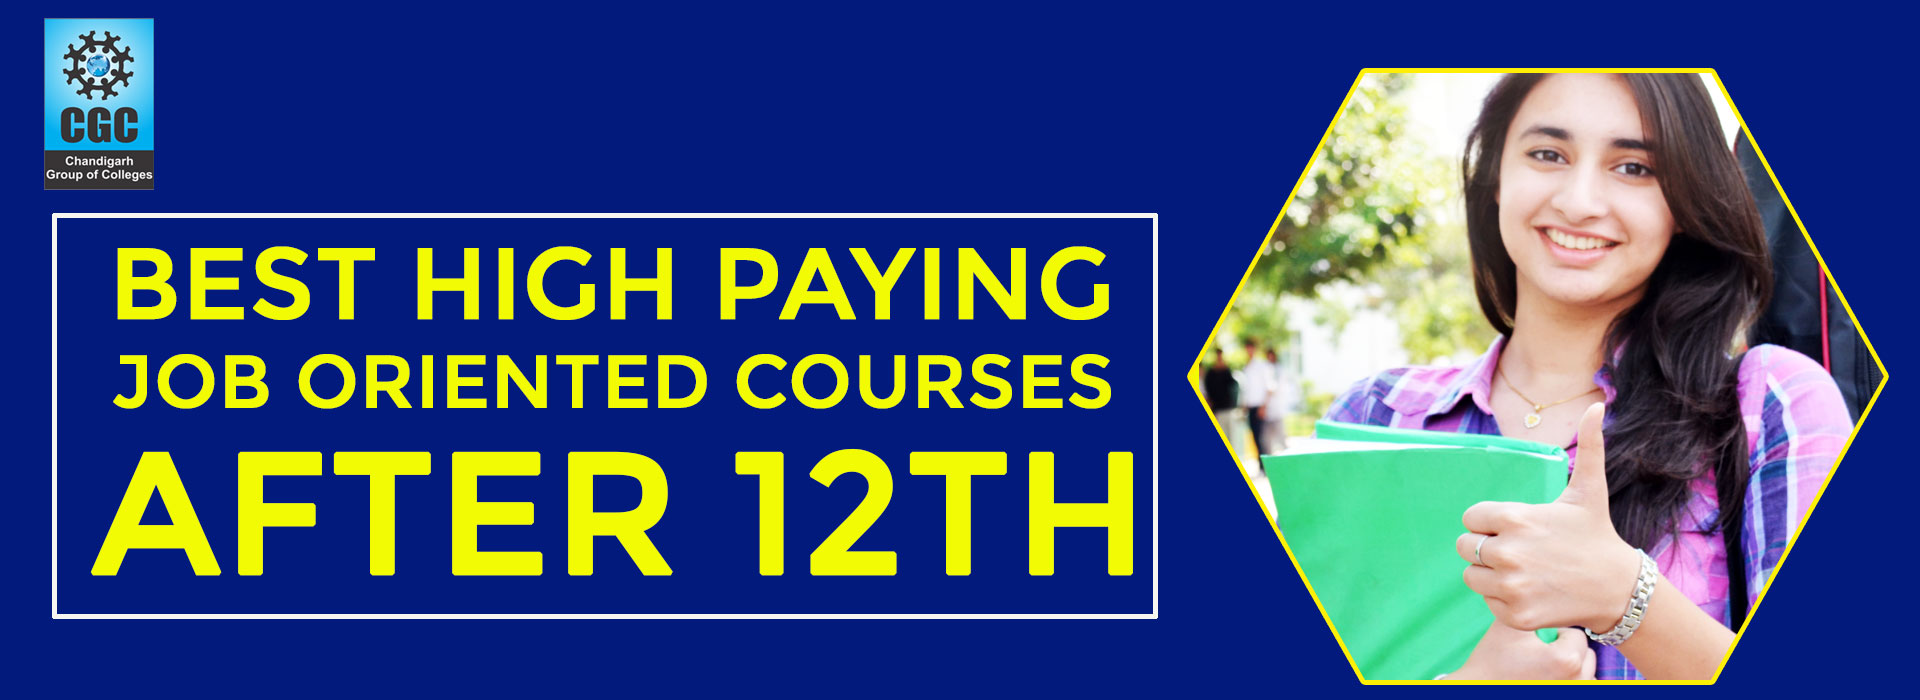 Best High Paying Job Oriented Courses After 12th 